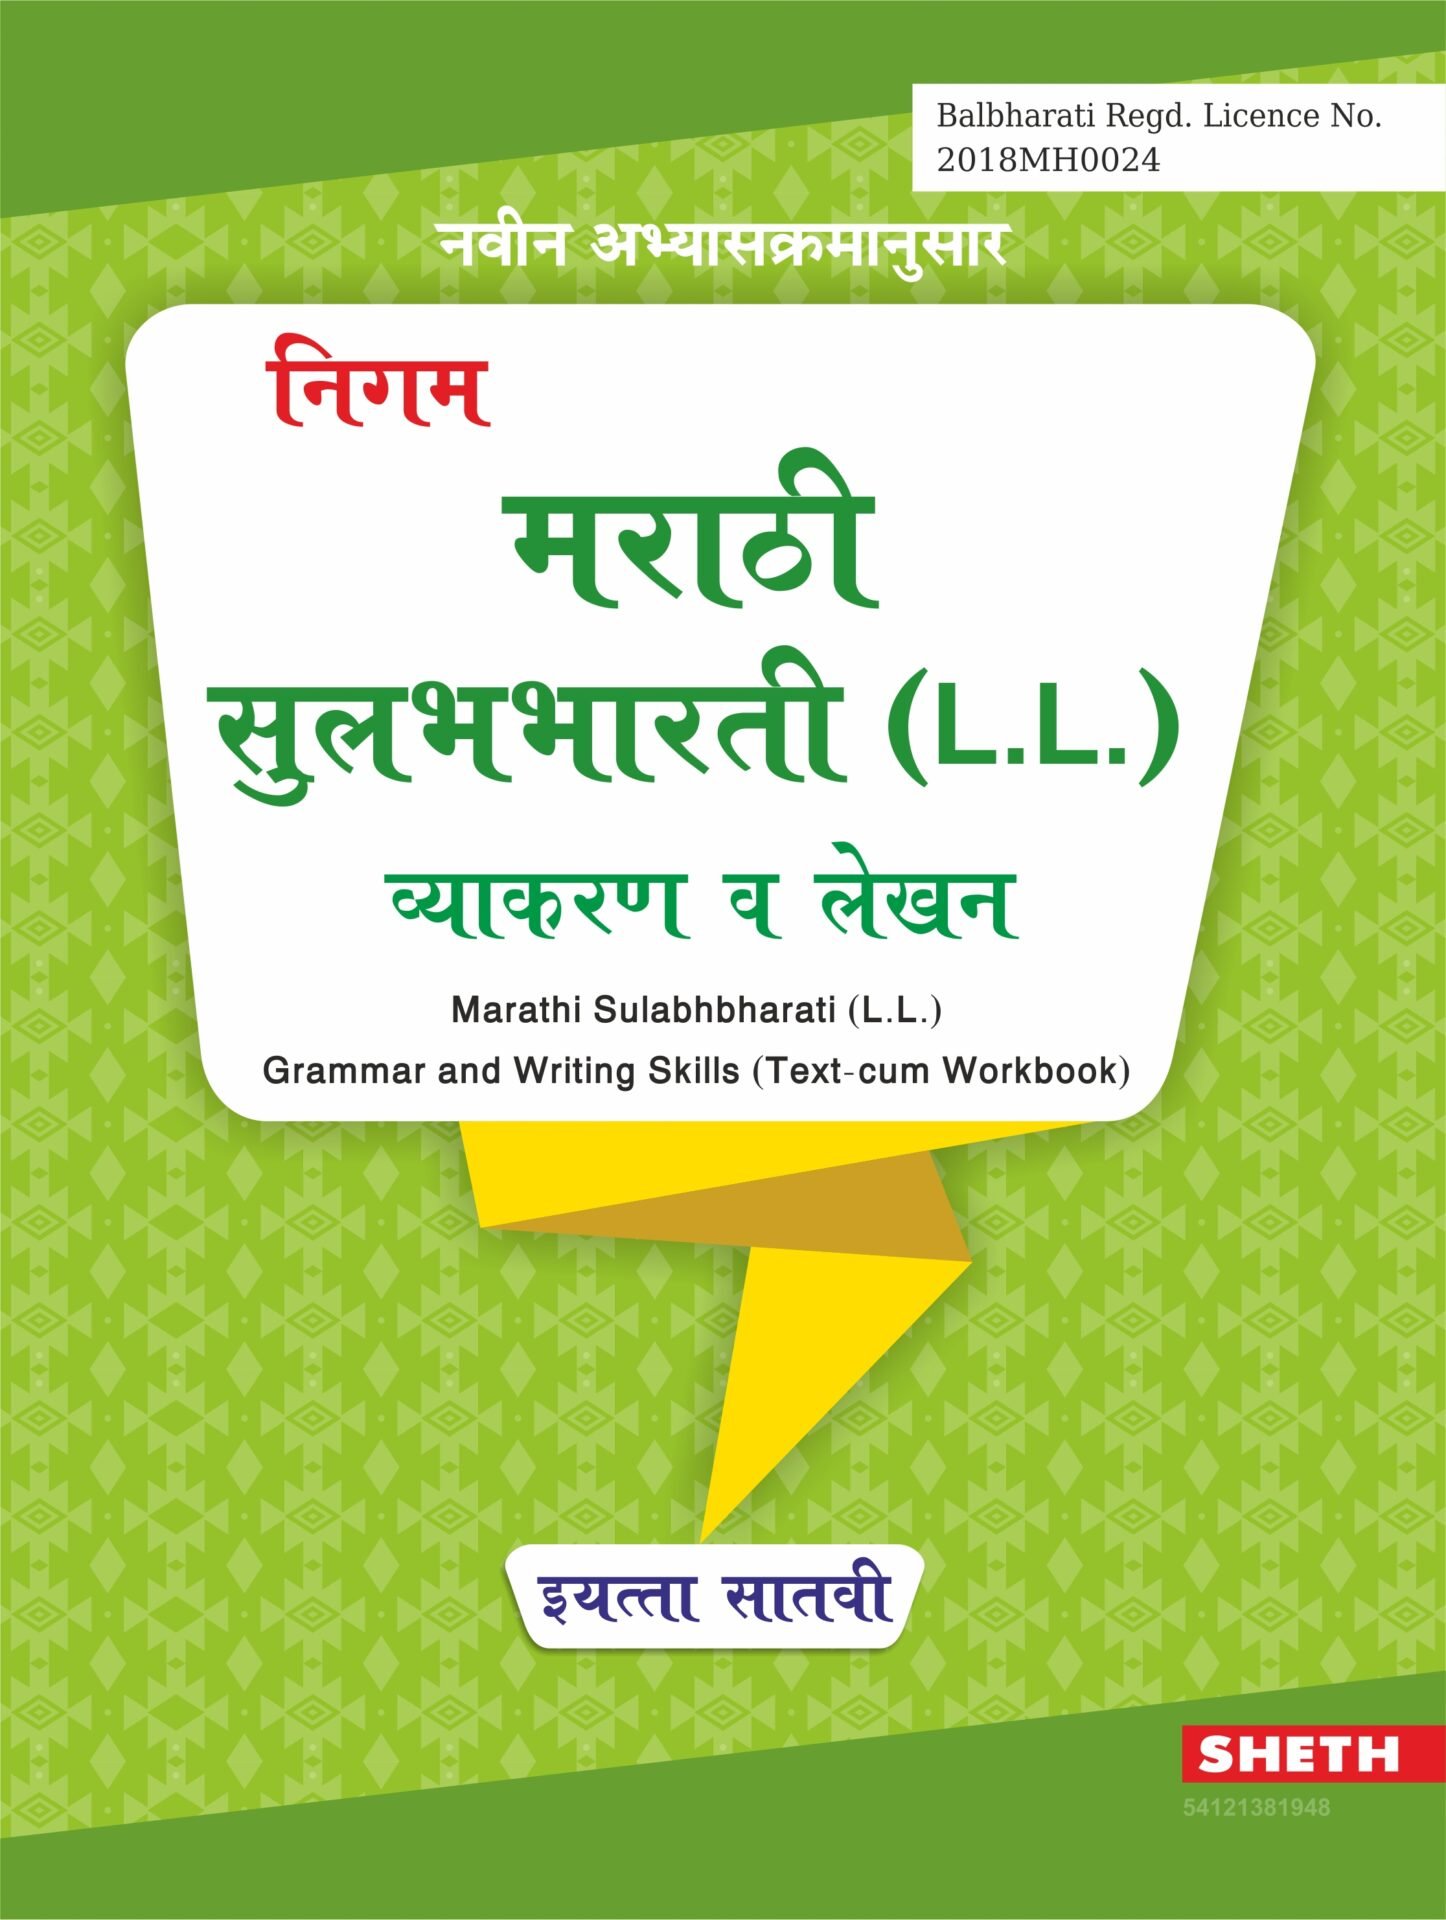 marathi-grammar-book-for-class-7-shethbooks-official-buy-page-of